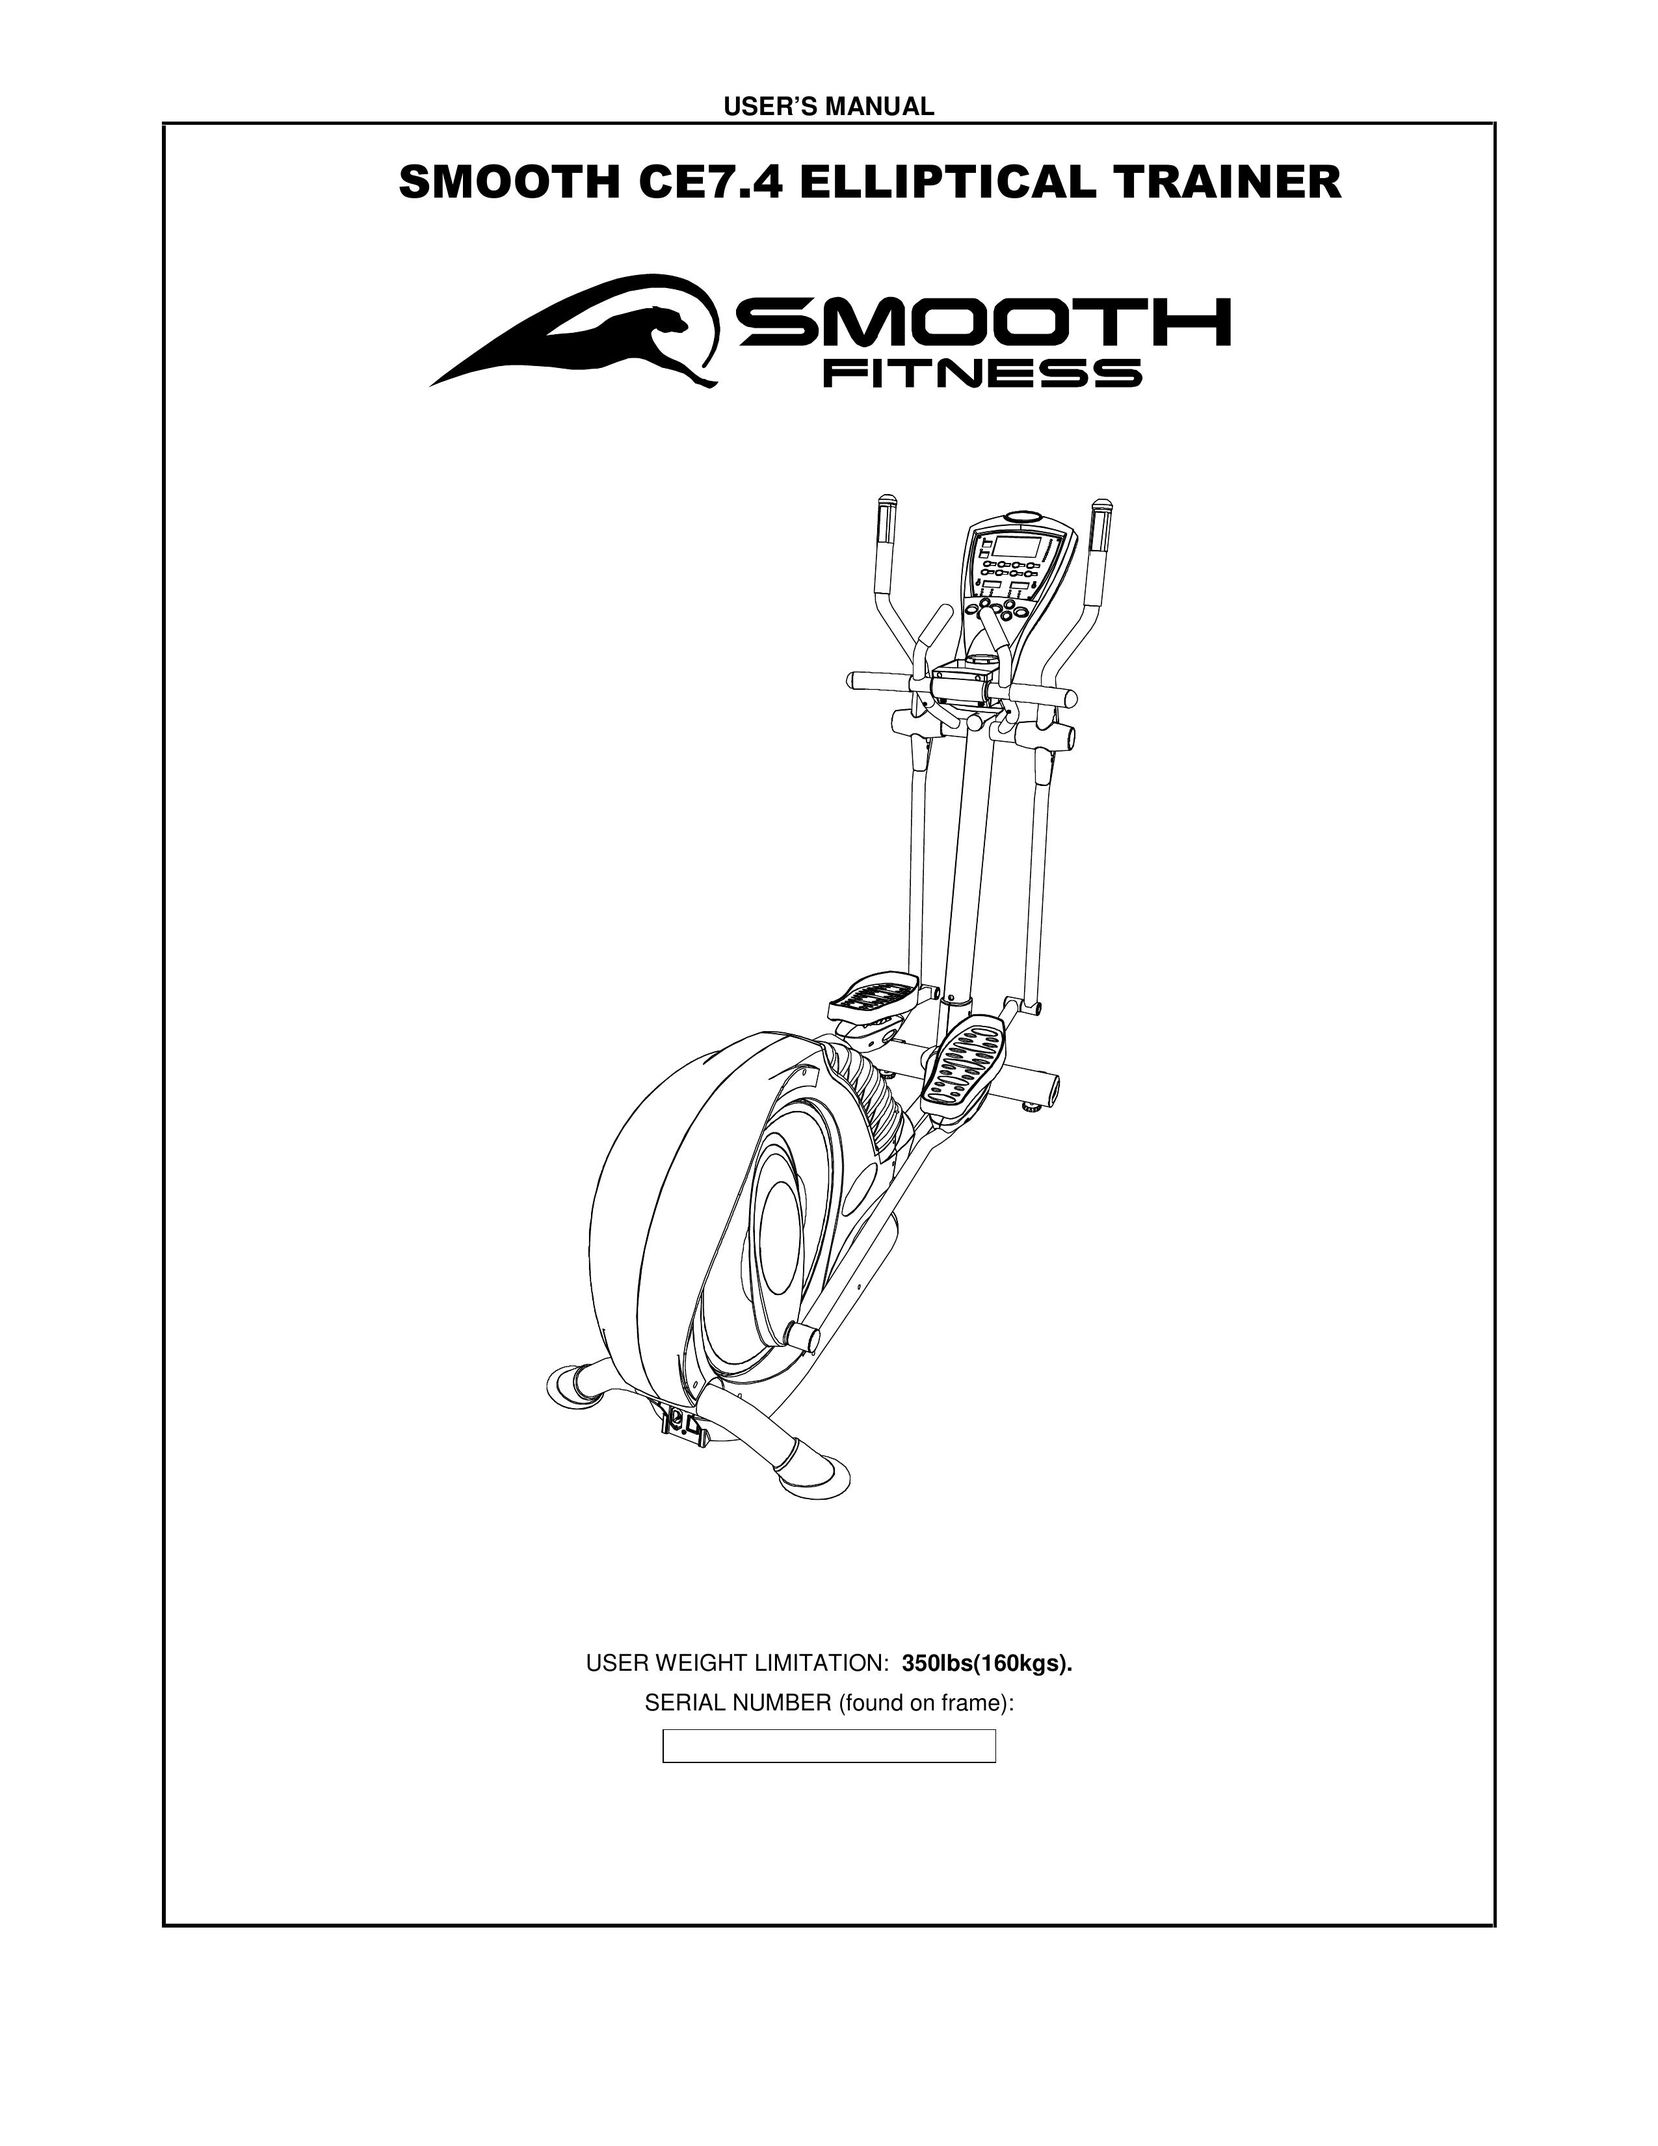 Smooth Fitness CE7.4 Elliptical Trainer User Manual